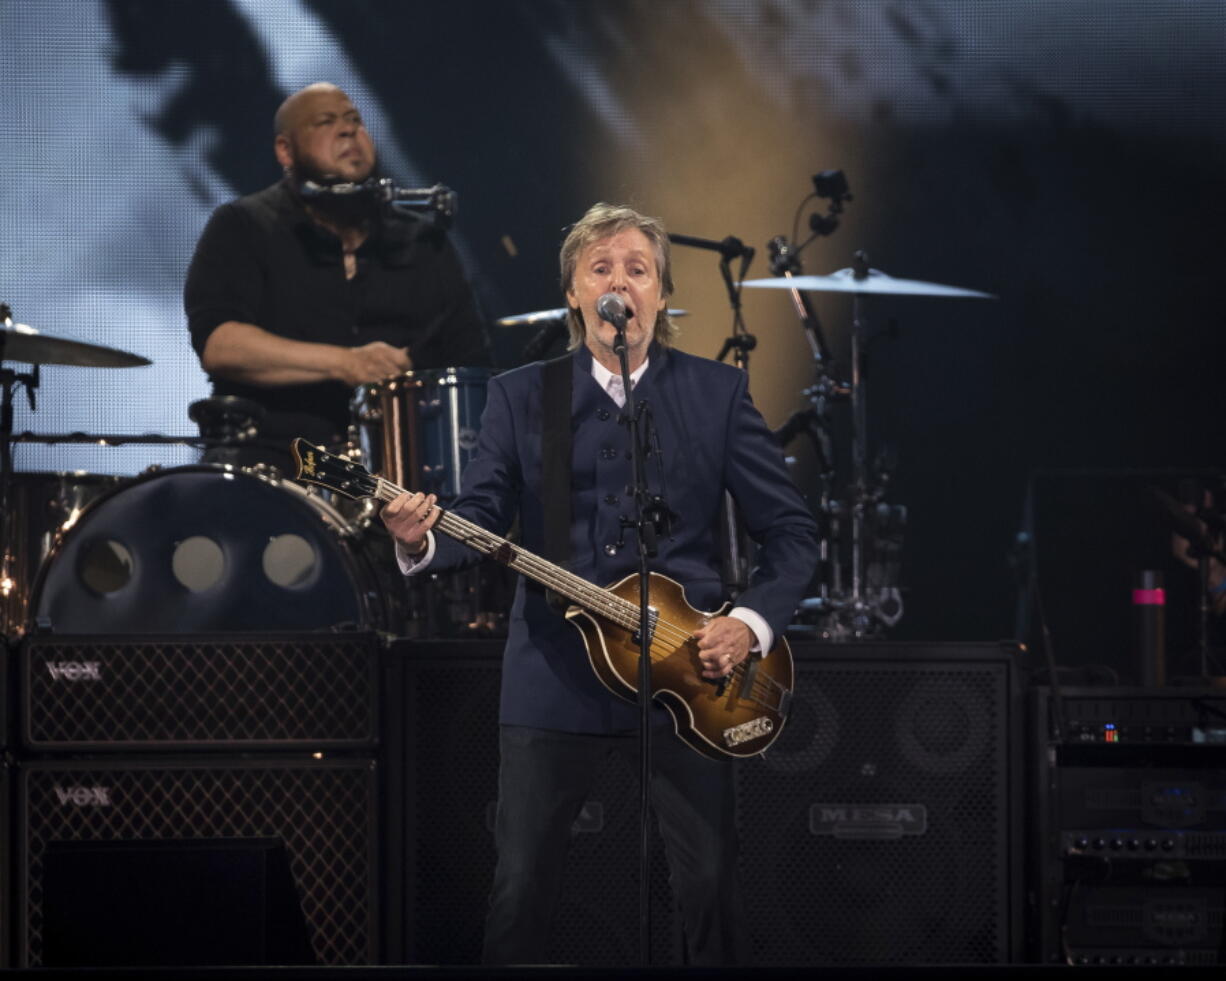 Paul McCartney performs during his "Got Back" tour Thursday, June 16, 2022, at MetLife Stadium in East Rutherford, N.J.